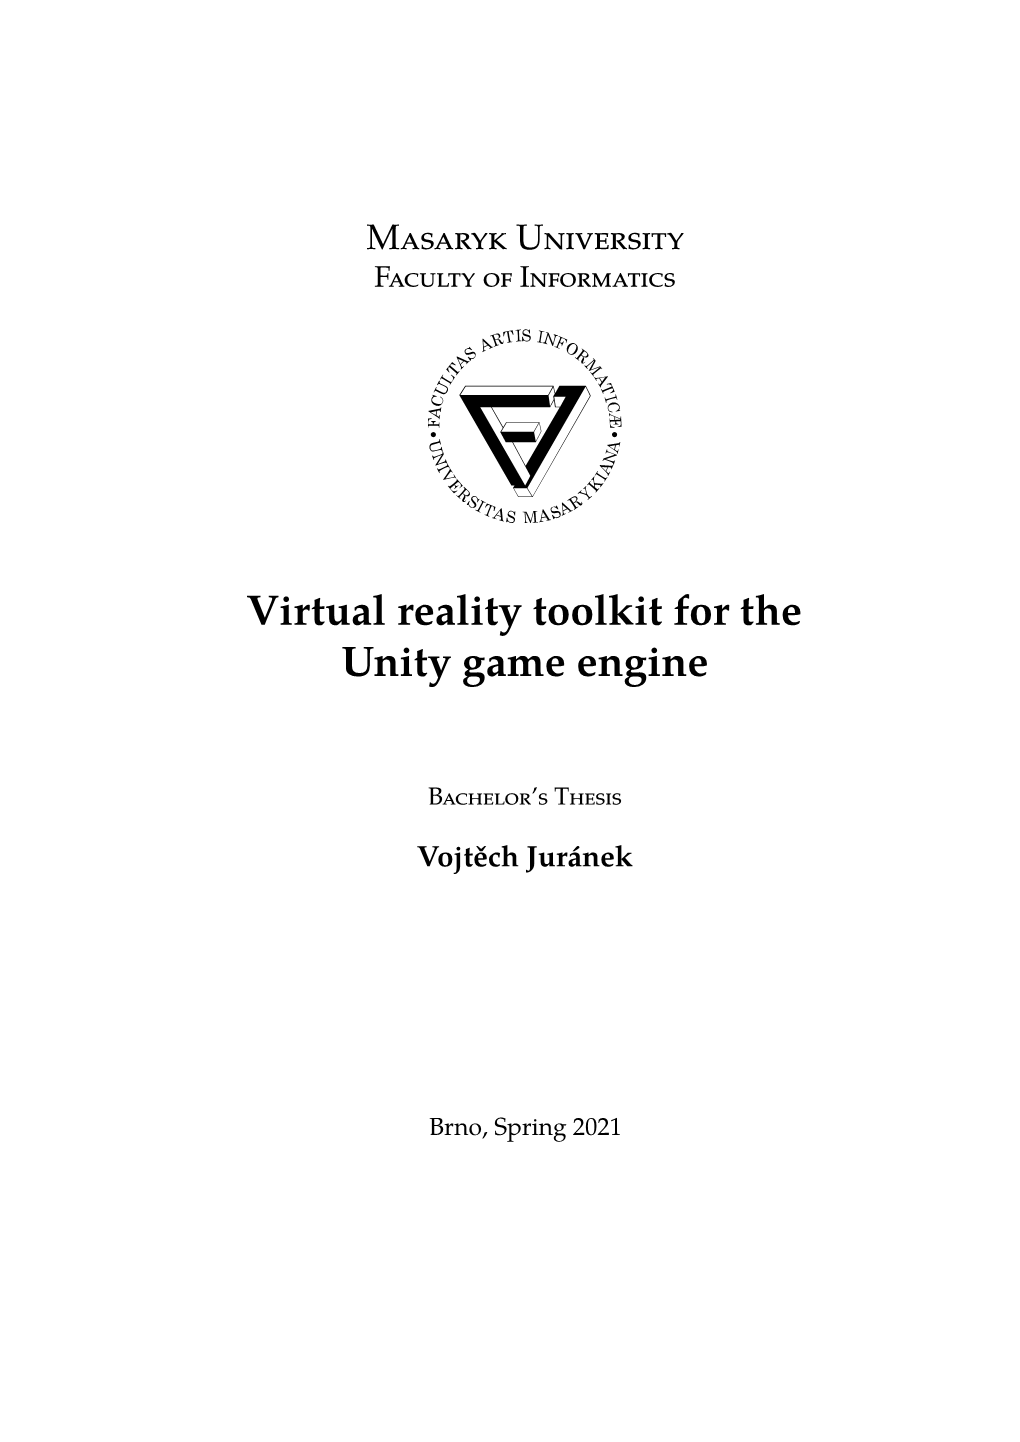 Virtual Reality Toolkit for the Unity Game Engine